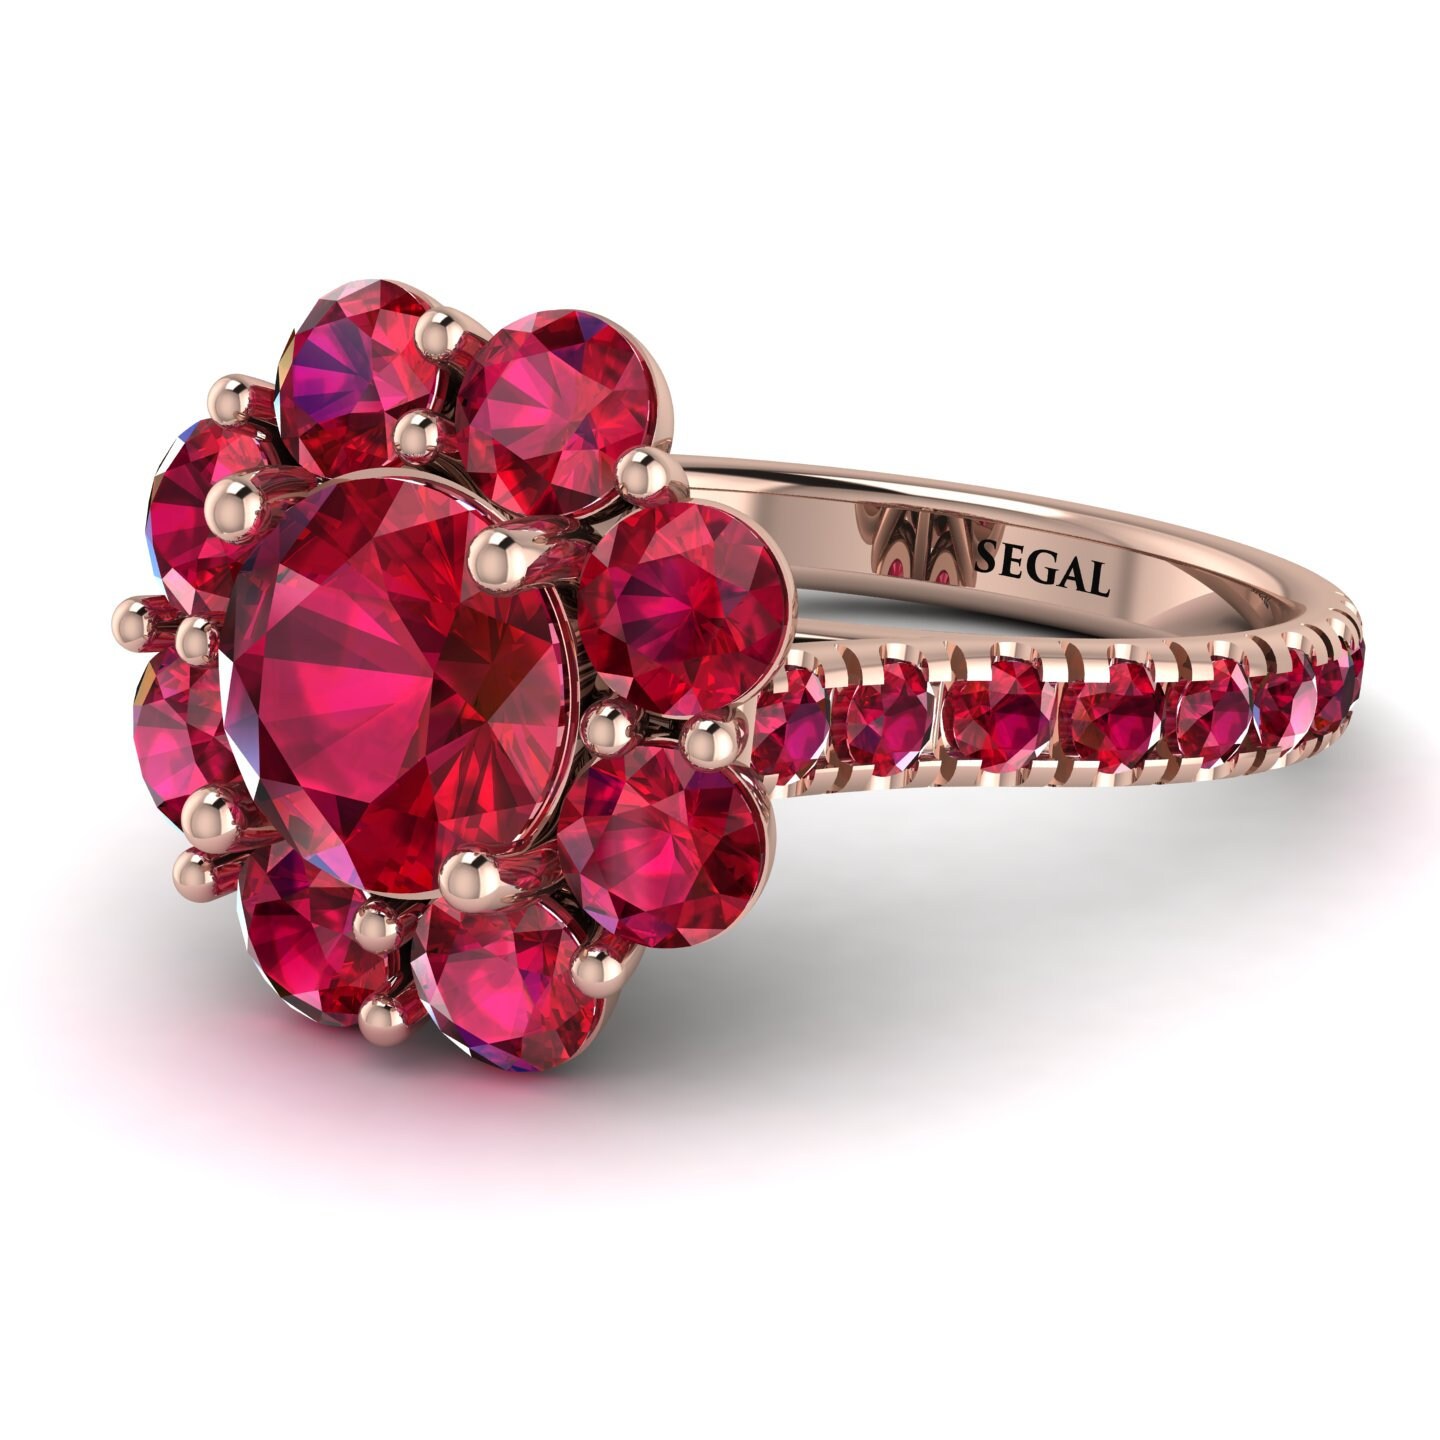 Is 3000 a lot for a ruby engagement ring